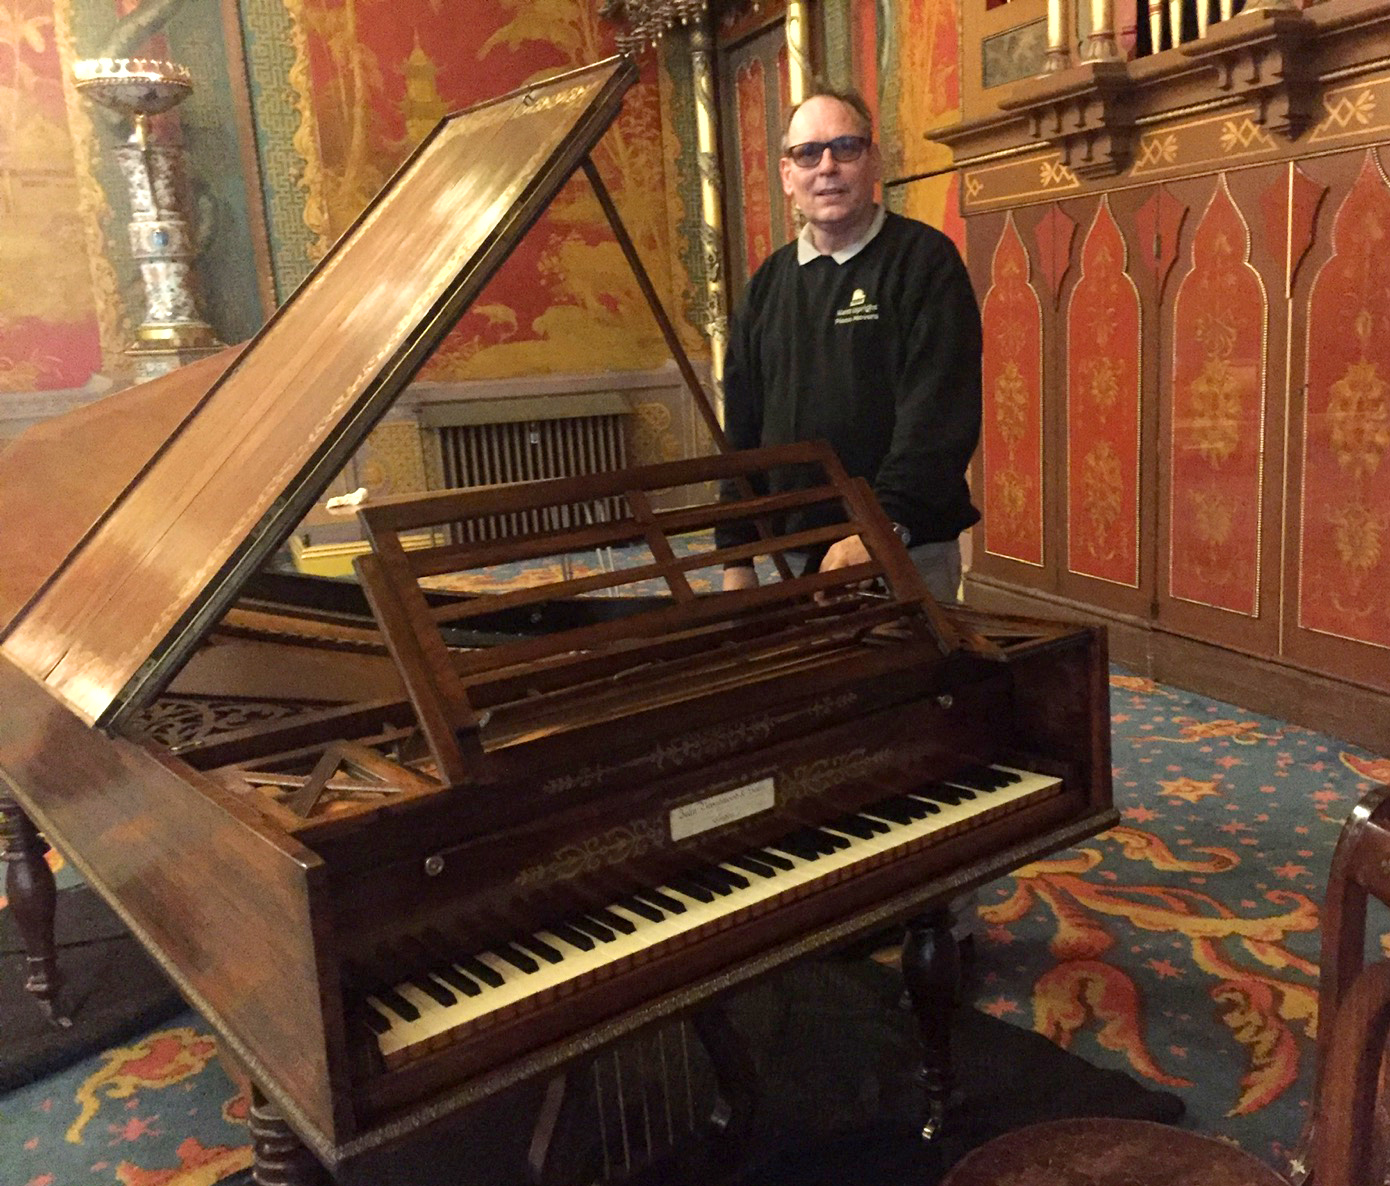 Chris at the Royal Pavilion with antique grand piano